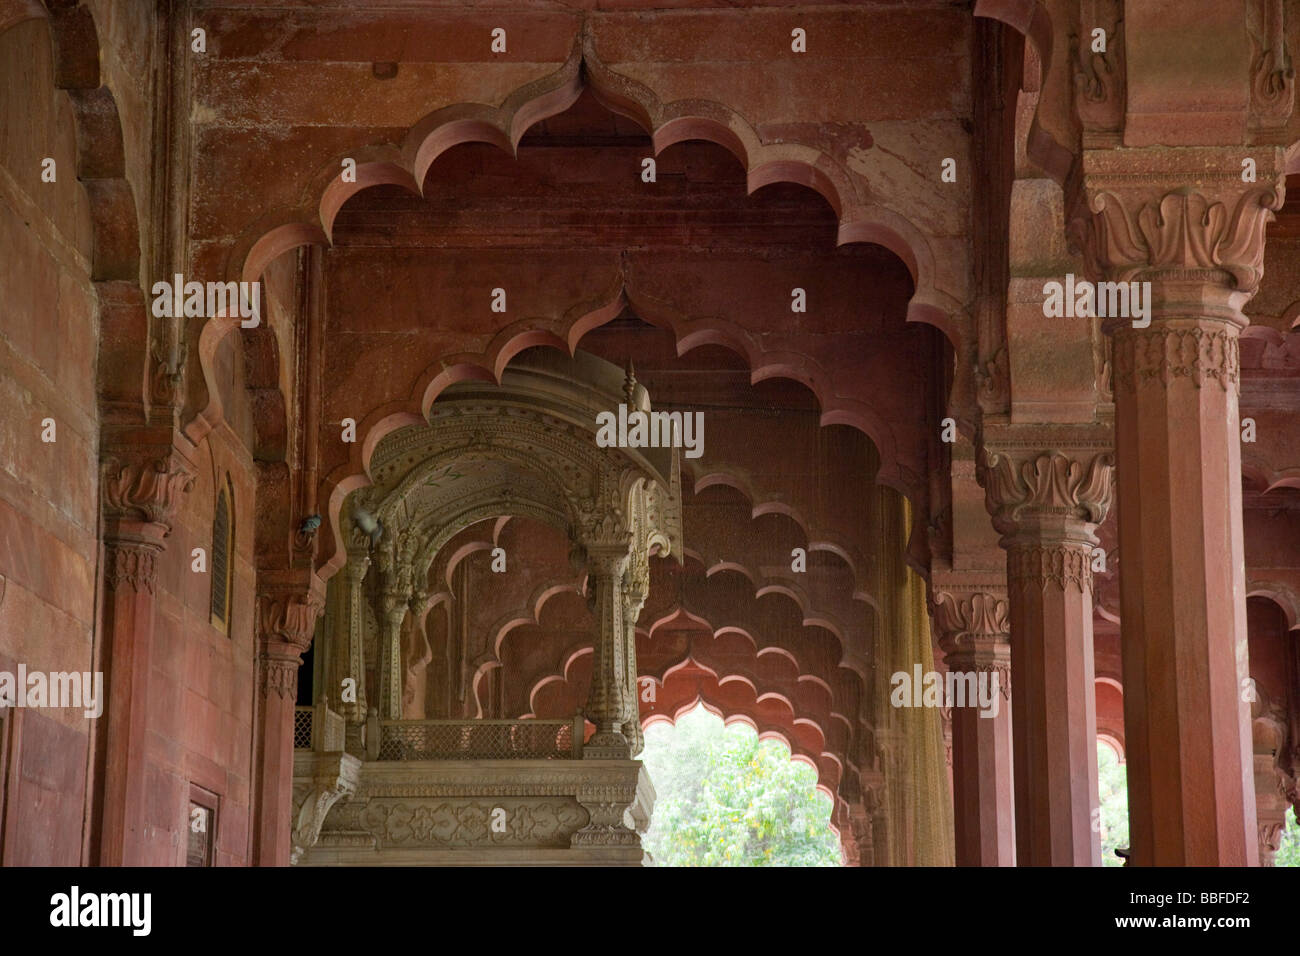 Throne or Jharokha in the Diwan i Am the Red Fort in Delhi India Stock Photo